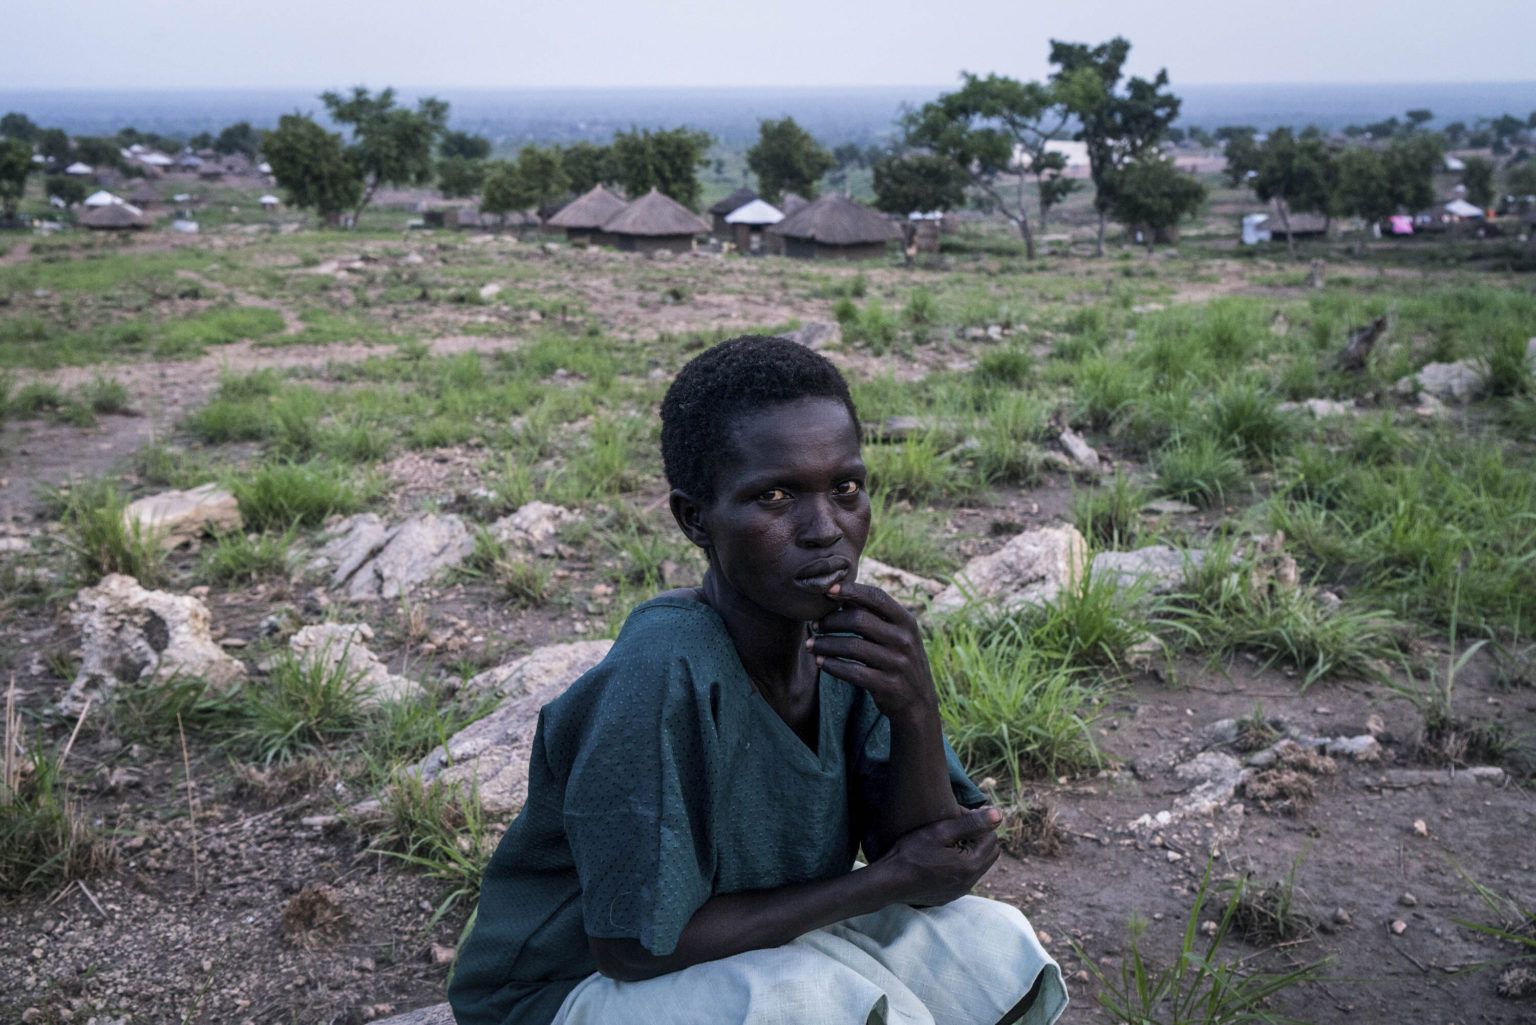 Uncertain future: Tabu Raida sits for a portrait in the Imvepi settlement for refugees that have fled from South Sudan to Uganda. Image by Adriane Ohanesian & Gael Cloarec / Getty Images.